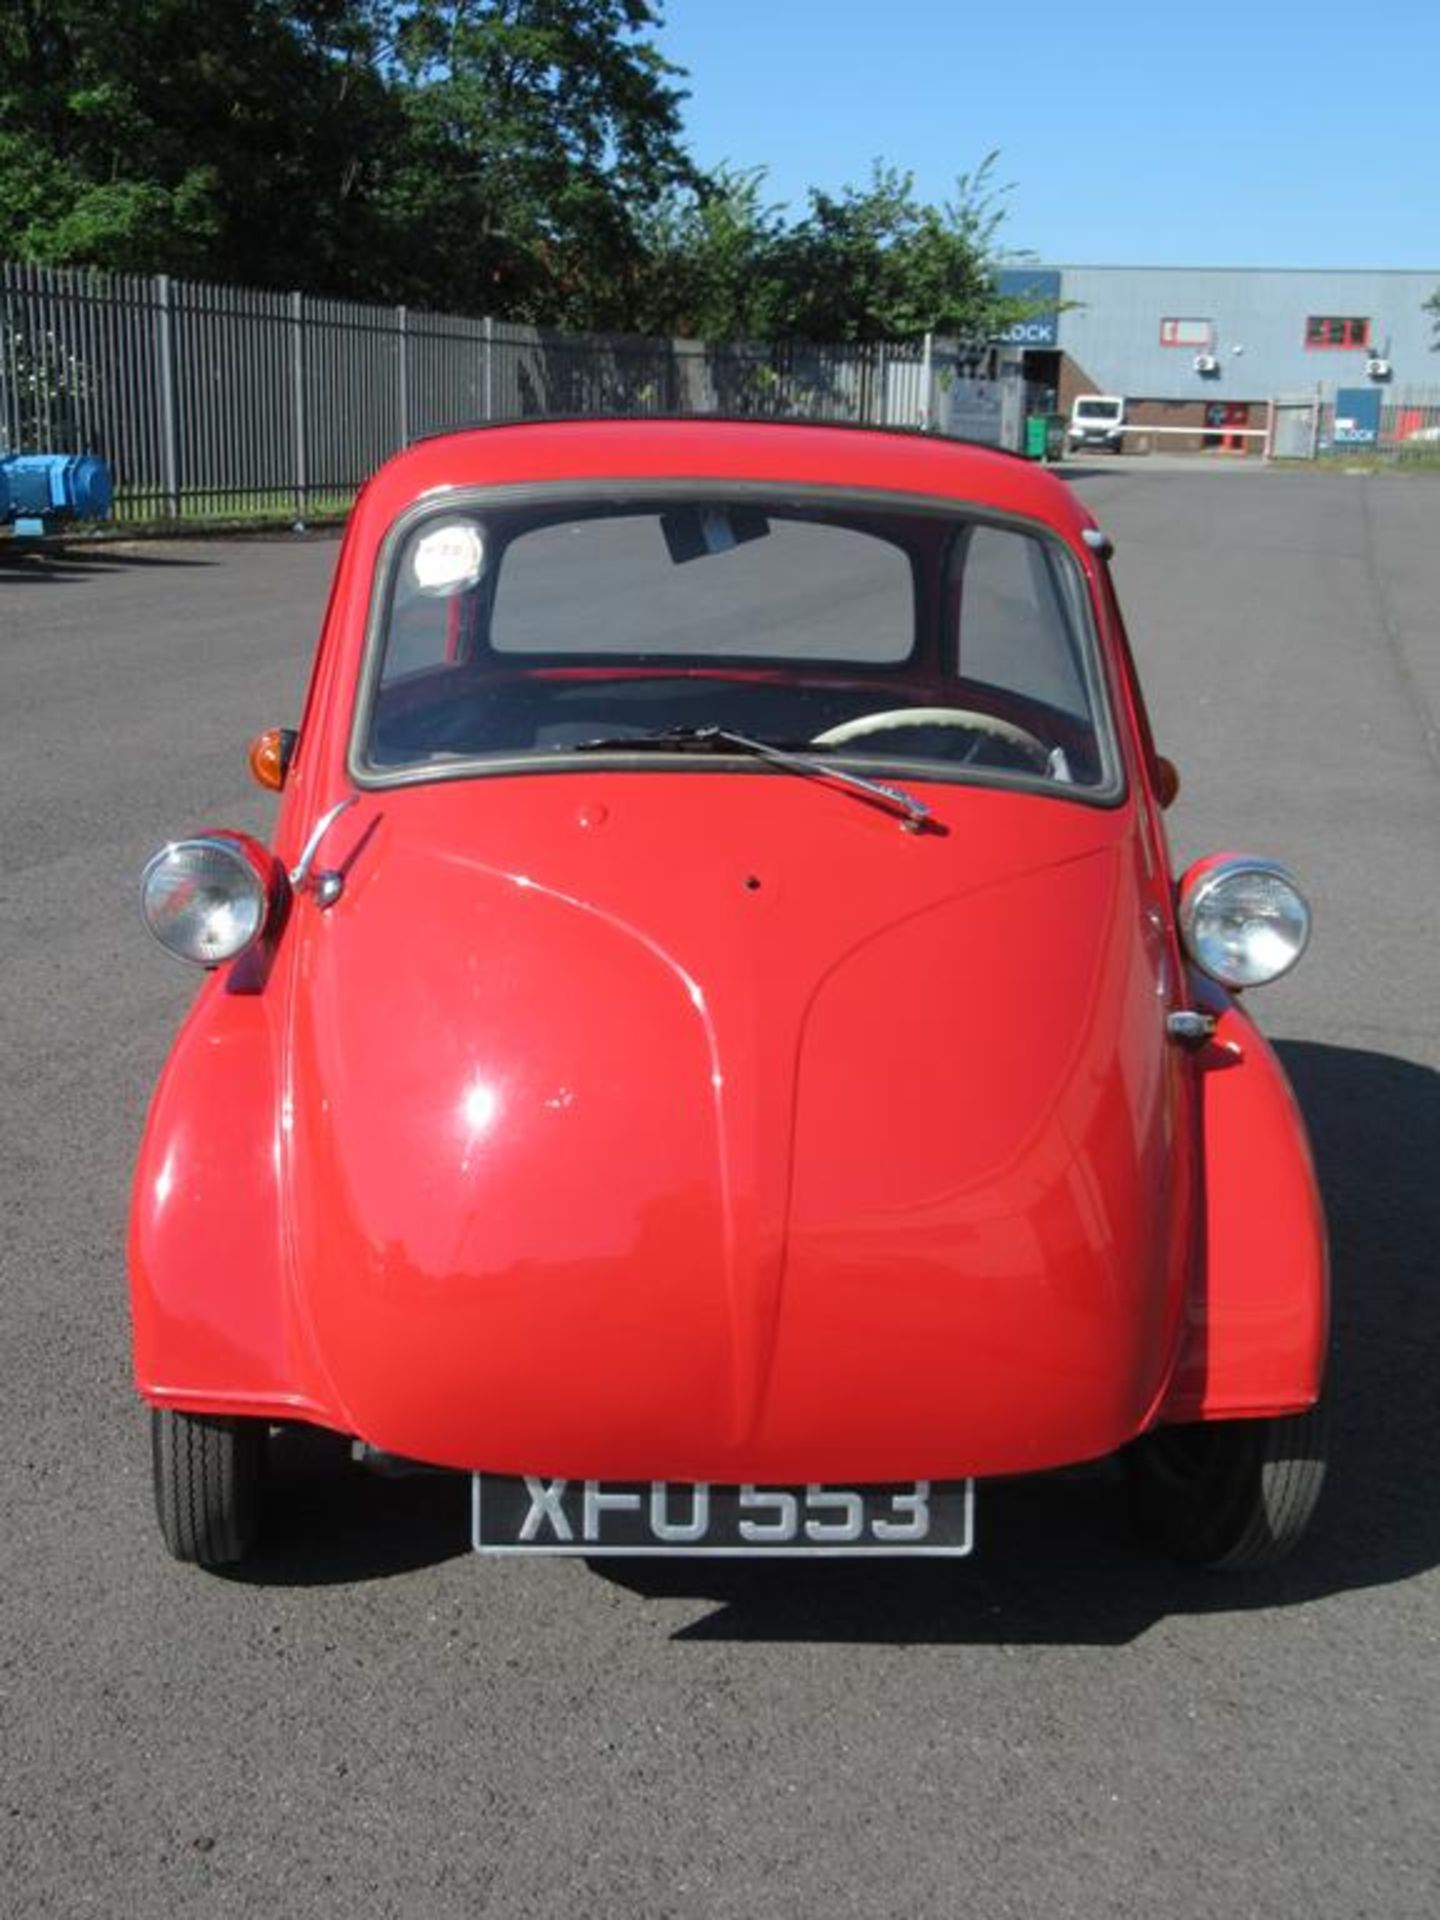 A 1960 Isetta 300 Bubble Car with Odometer Reading 9098 miles - Image 3 of 23